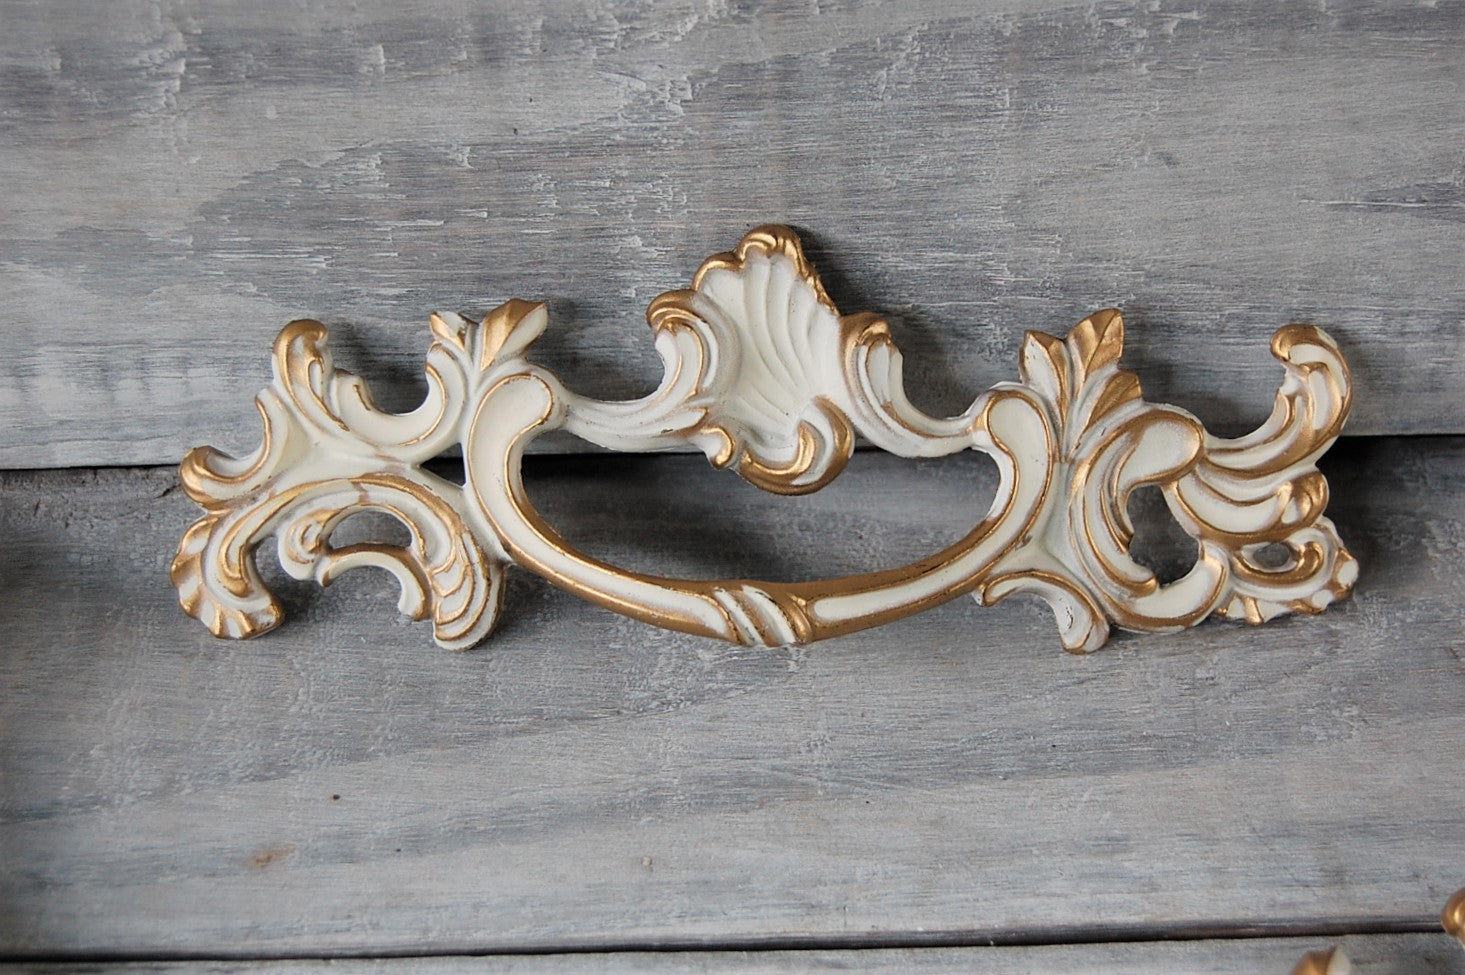 French Provincial drawer pulls – The Vintage Artistry